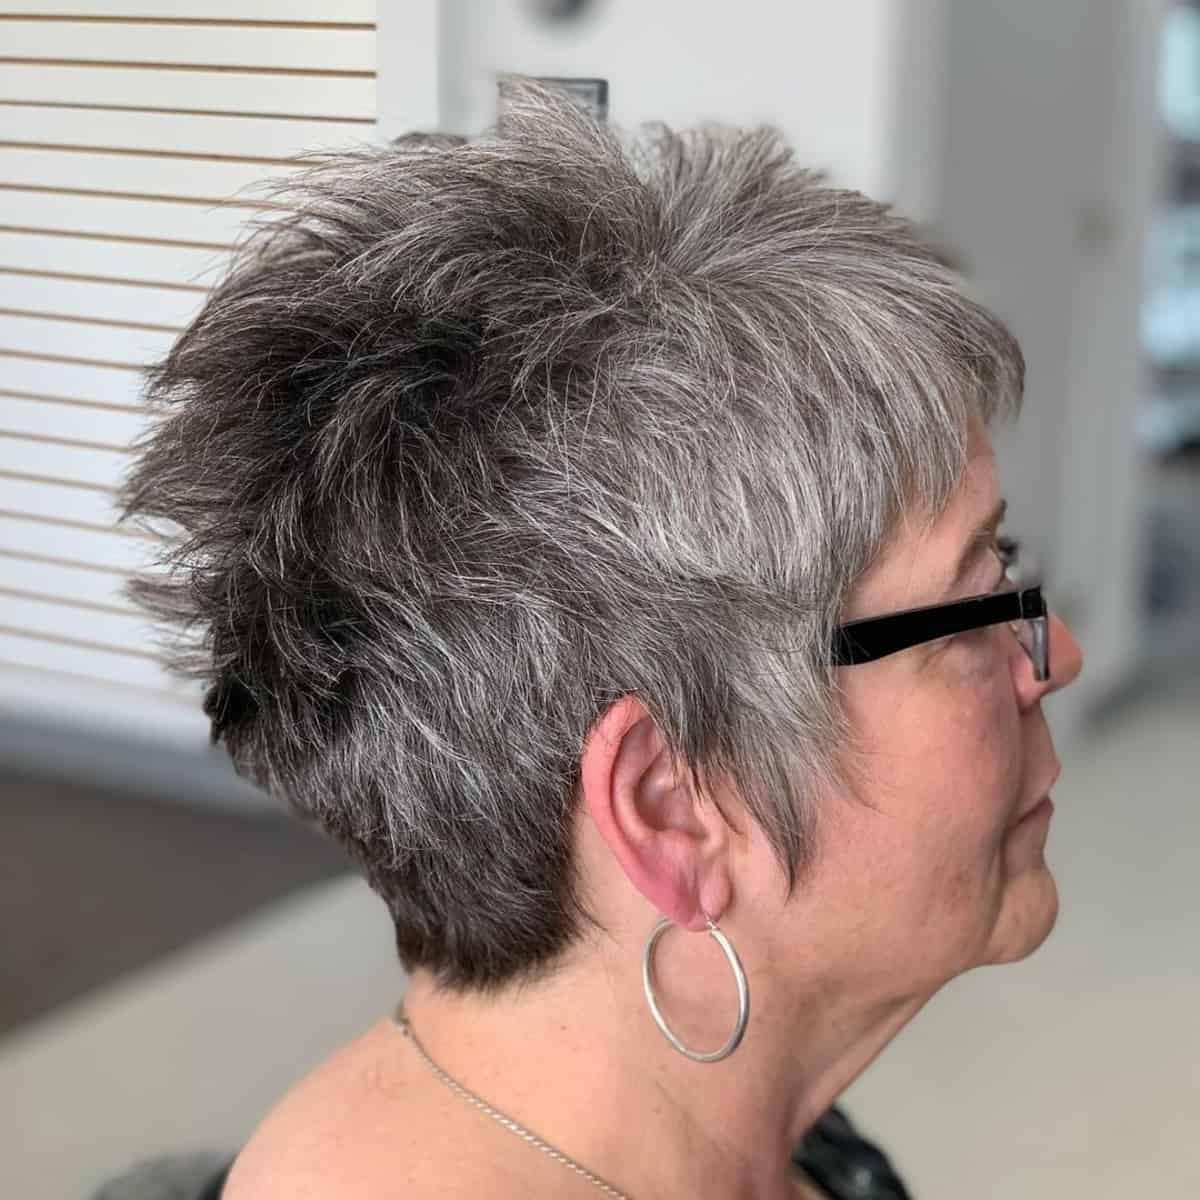 Salt-and-Pepper Pixie for Women with Glasses